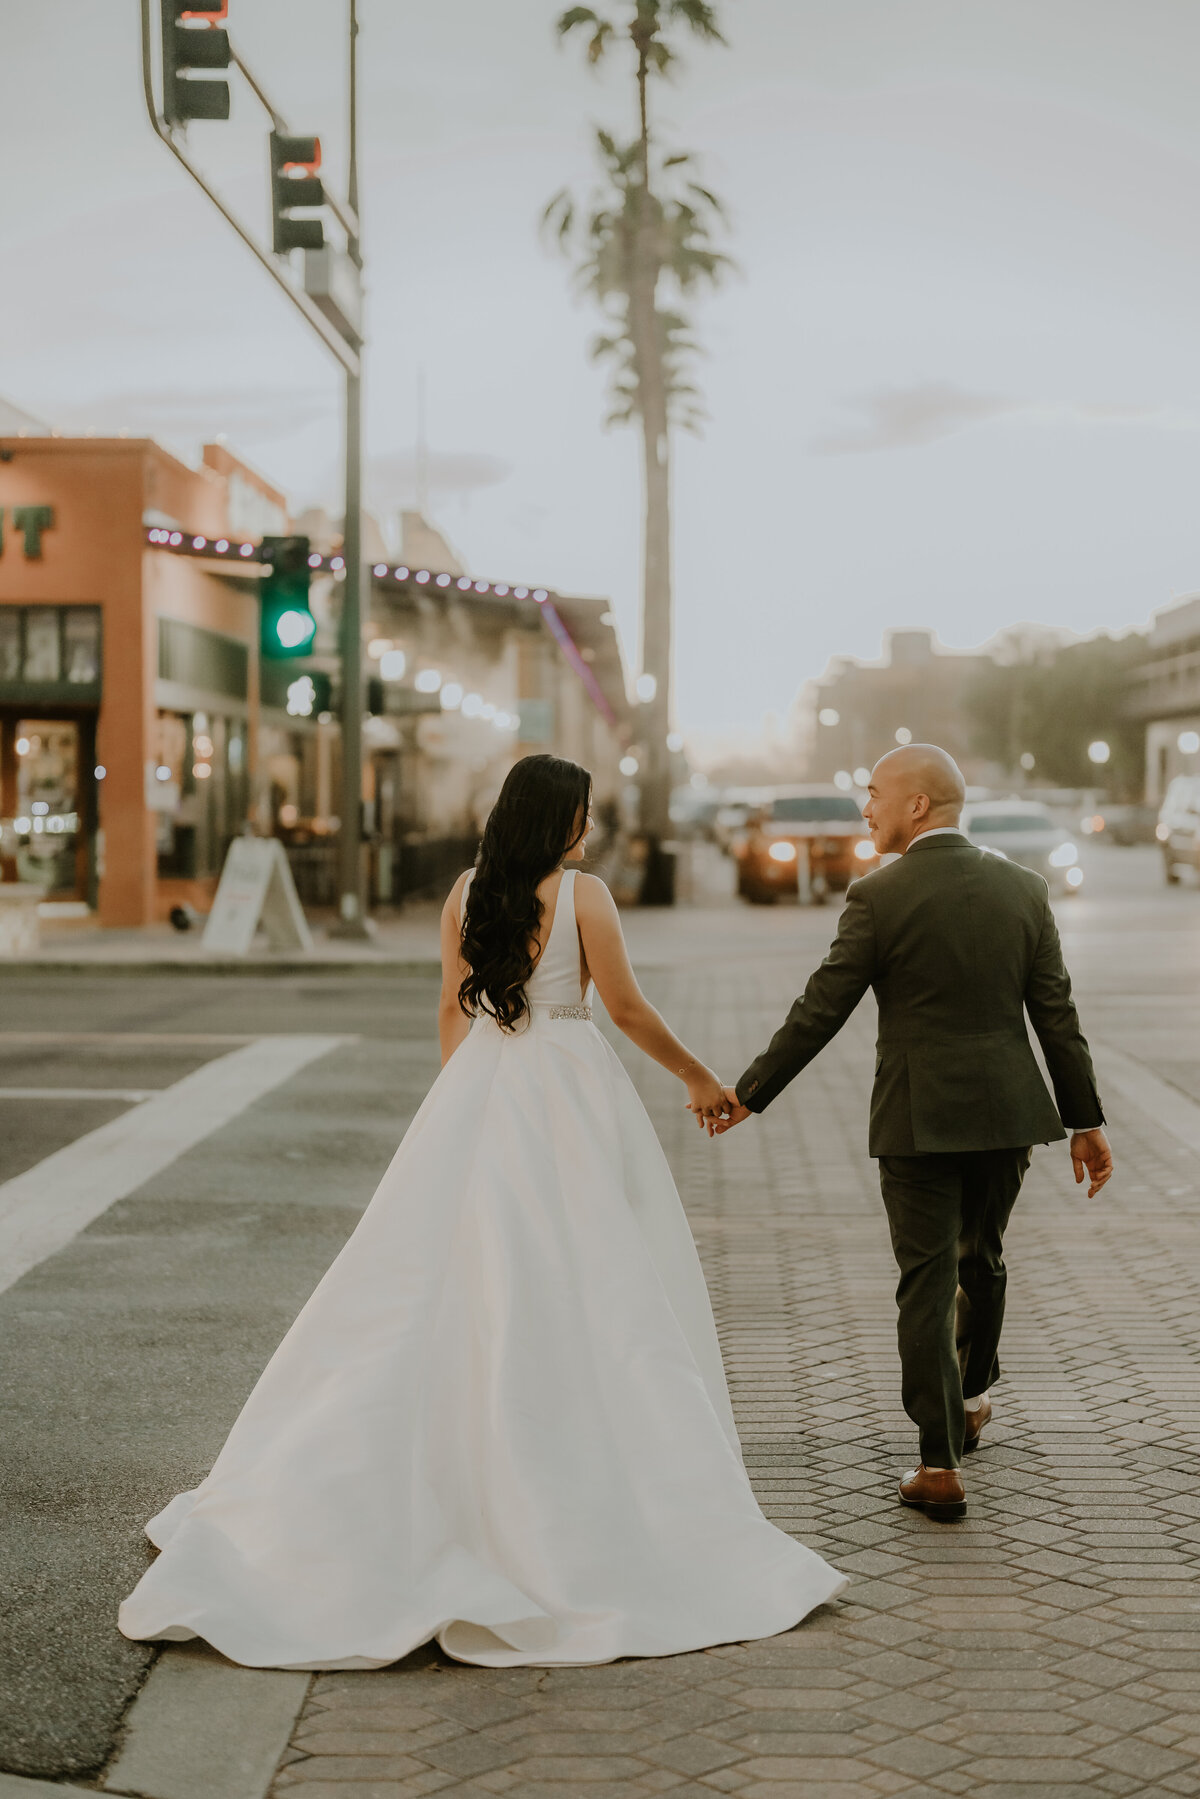 Bride and Groom walking the streets with palm trees Temecula, California Wedding photographer Yescphotography